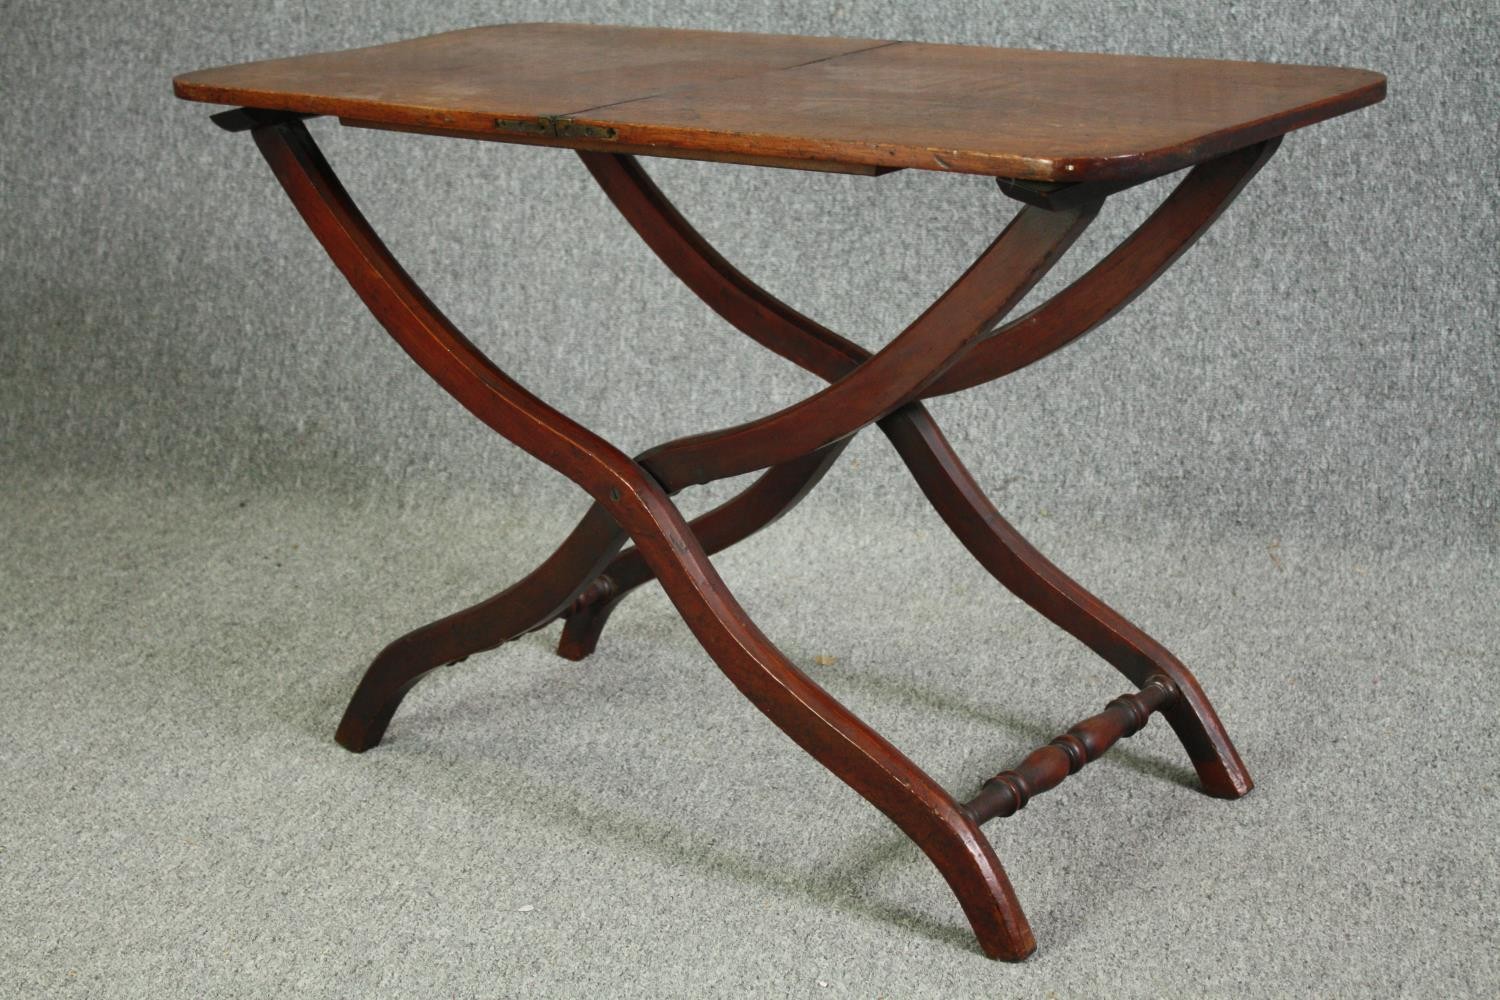 A 19th century mahogany folding campaign table, later adapted to a fixed top. H.59 W.91 W.45cm. - Image 4 of 7